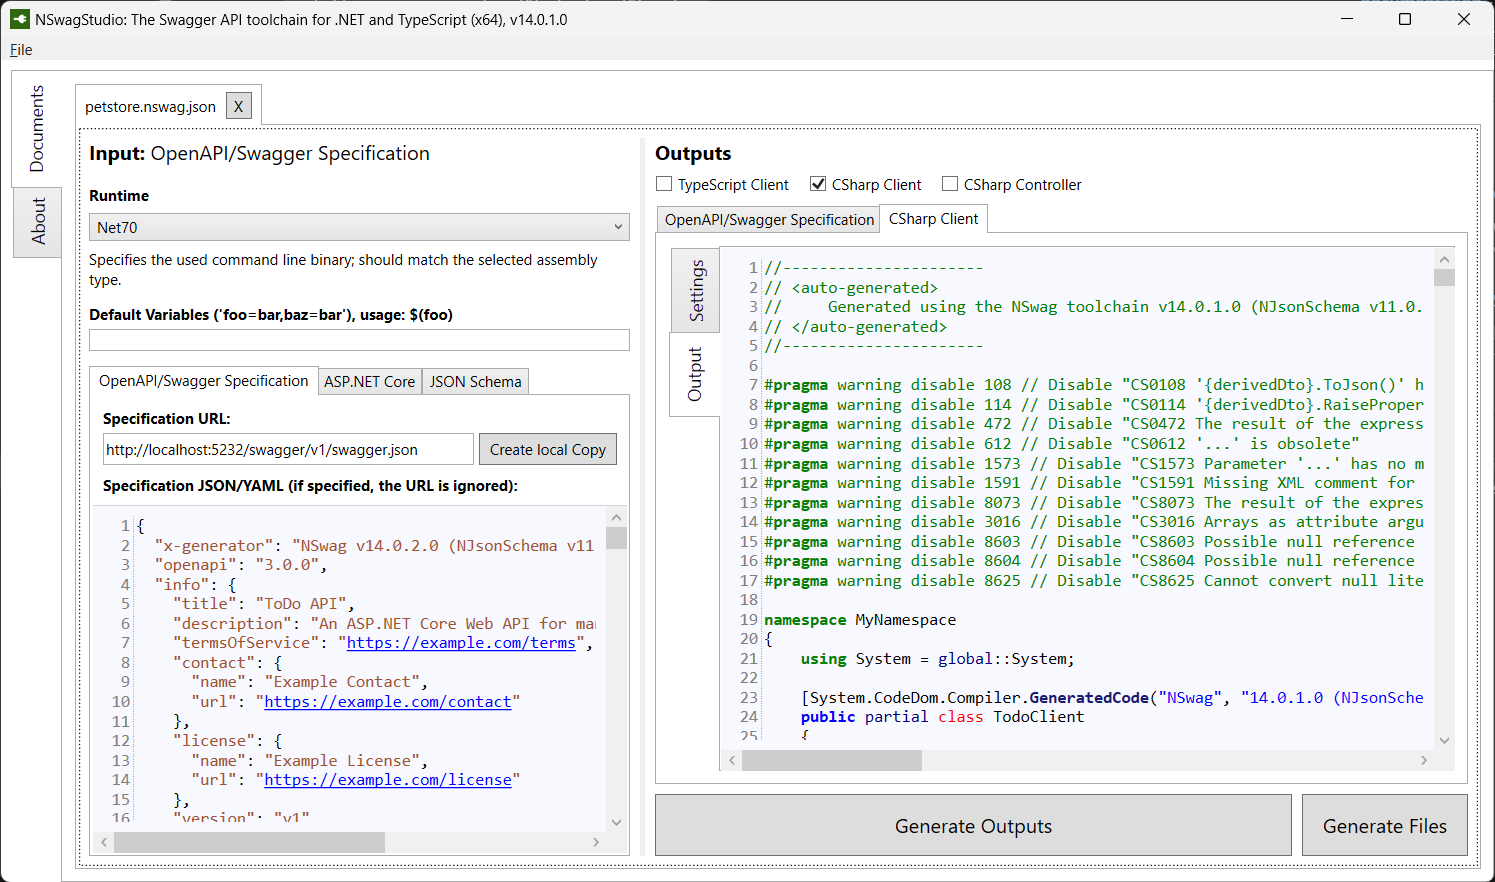 NSwag Studio imports the specification and exports a CSharp Client.